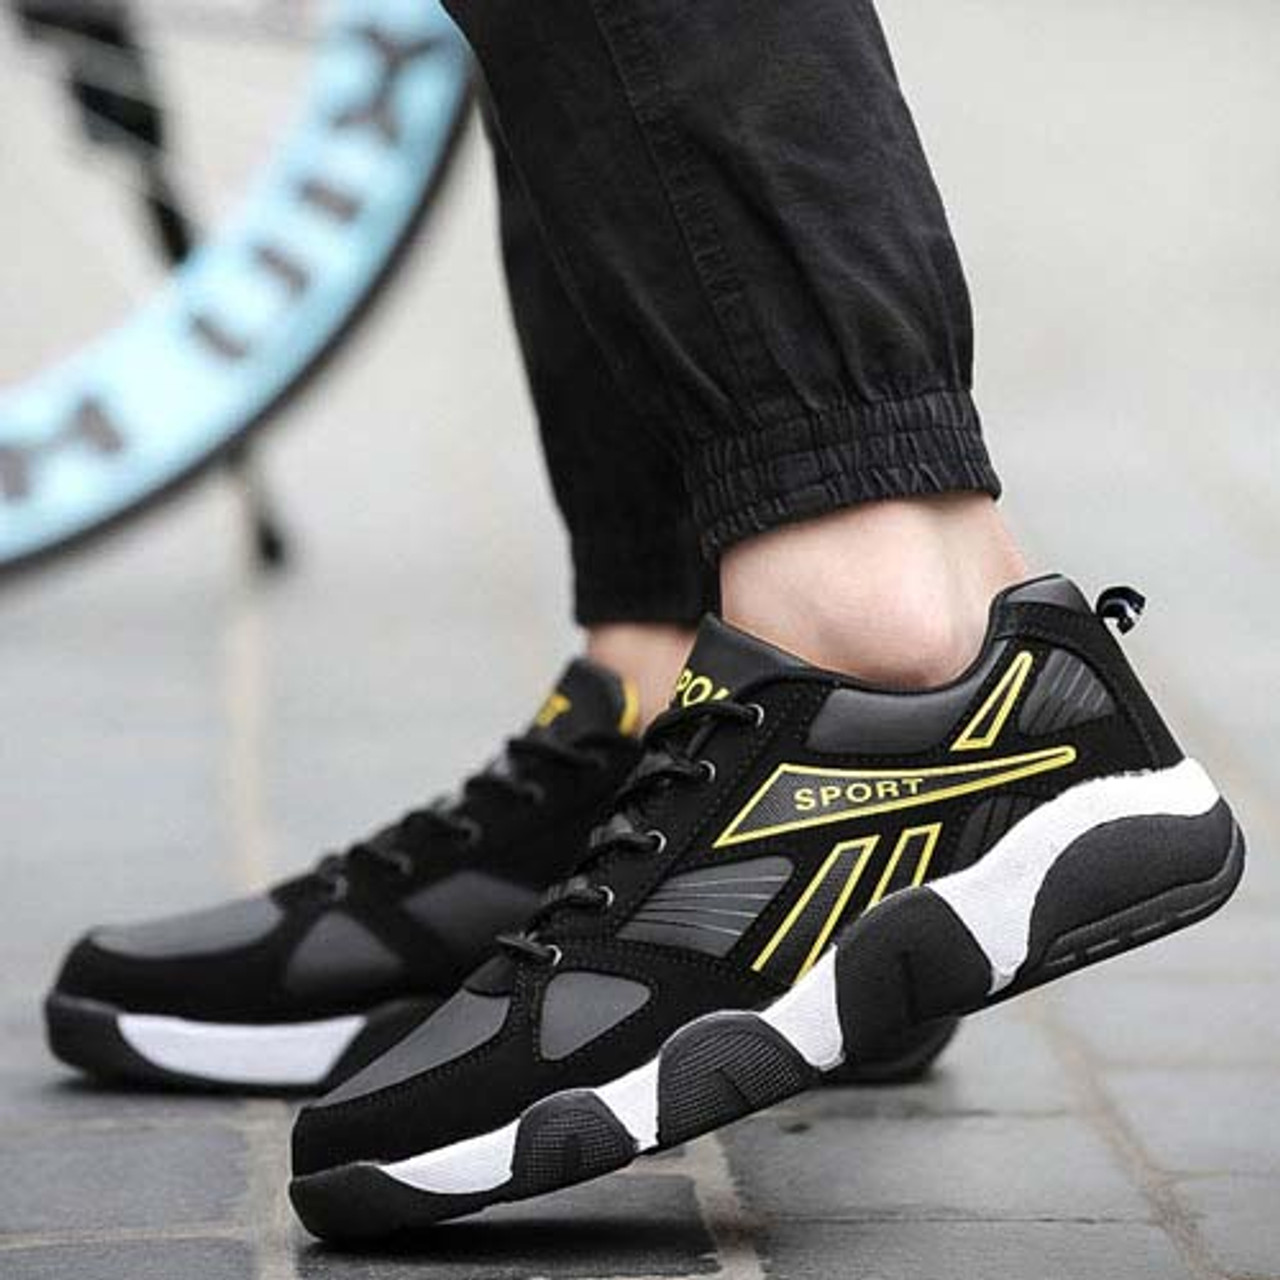 Black yellow pattern print leather lace up shoe sneaker | Mens shoes ...